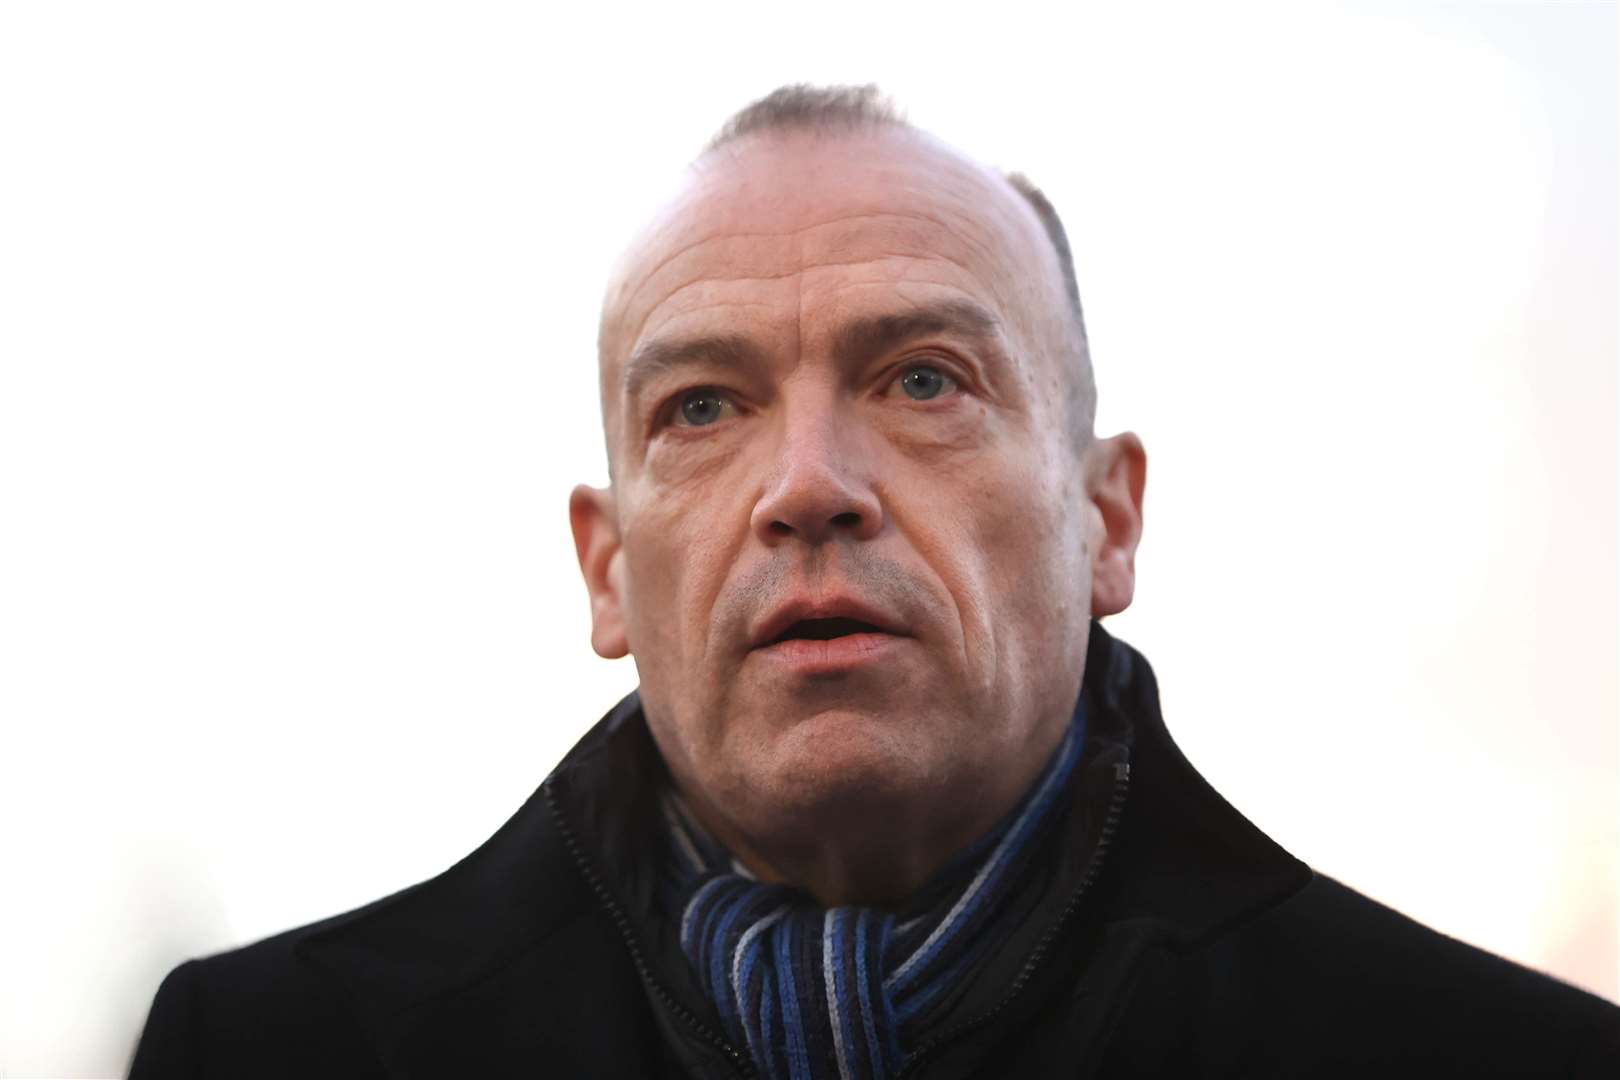 Northern Ireland Secretary Chris Heaton-Harris has said that his priority is the restoration of the executive in Northern Ireland that can deliver for working people (Liam McBurney/PA)